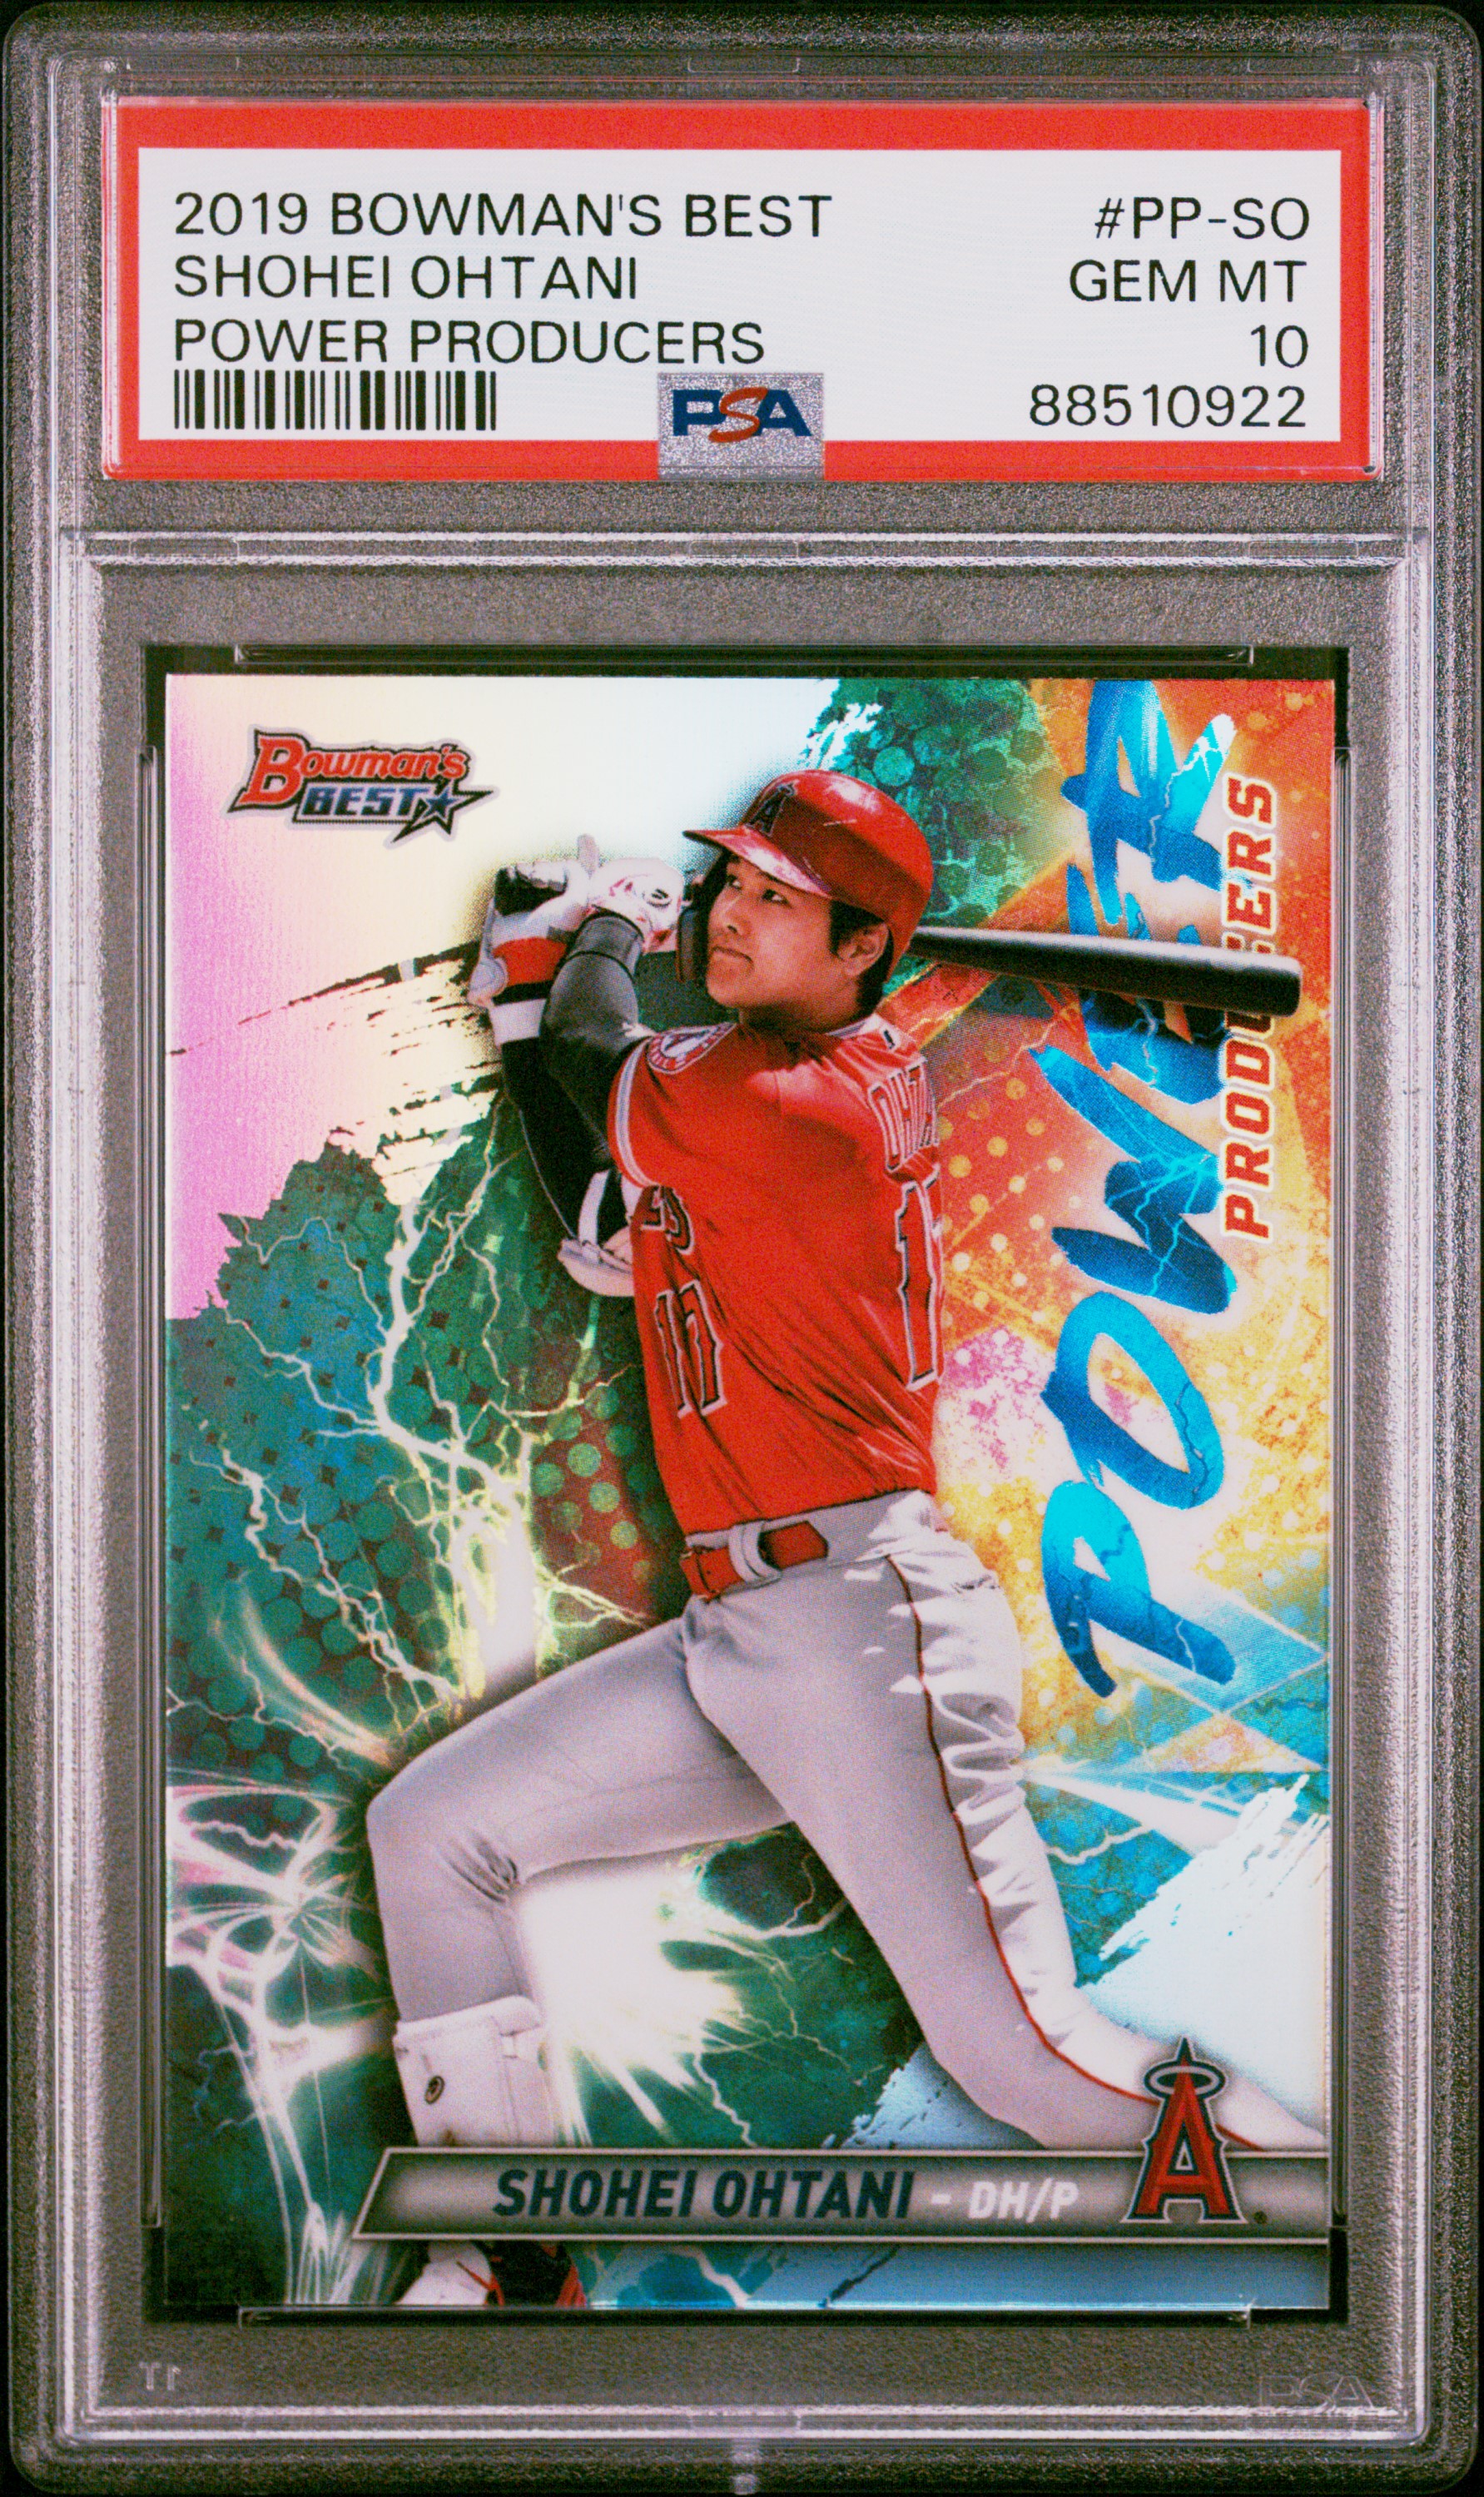 Shohei Ohtani 2019 Bowman's Best #PP-SO Power Producers Price 